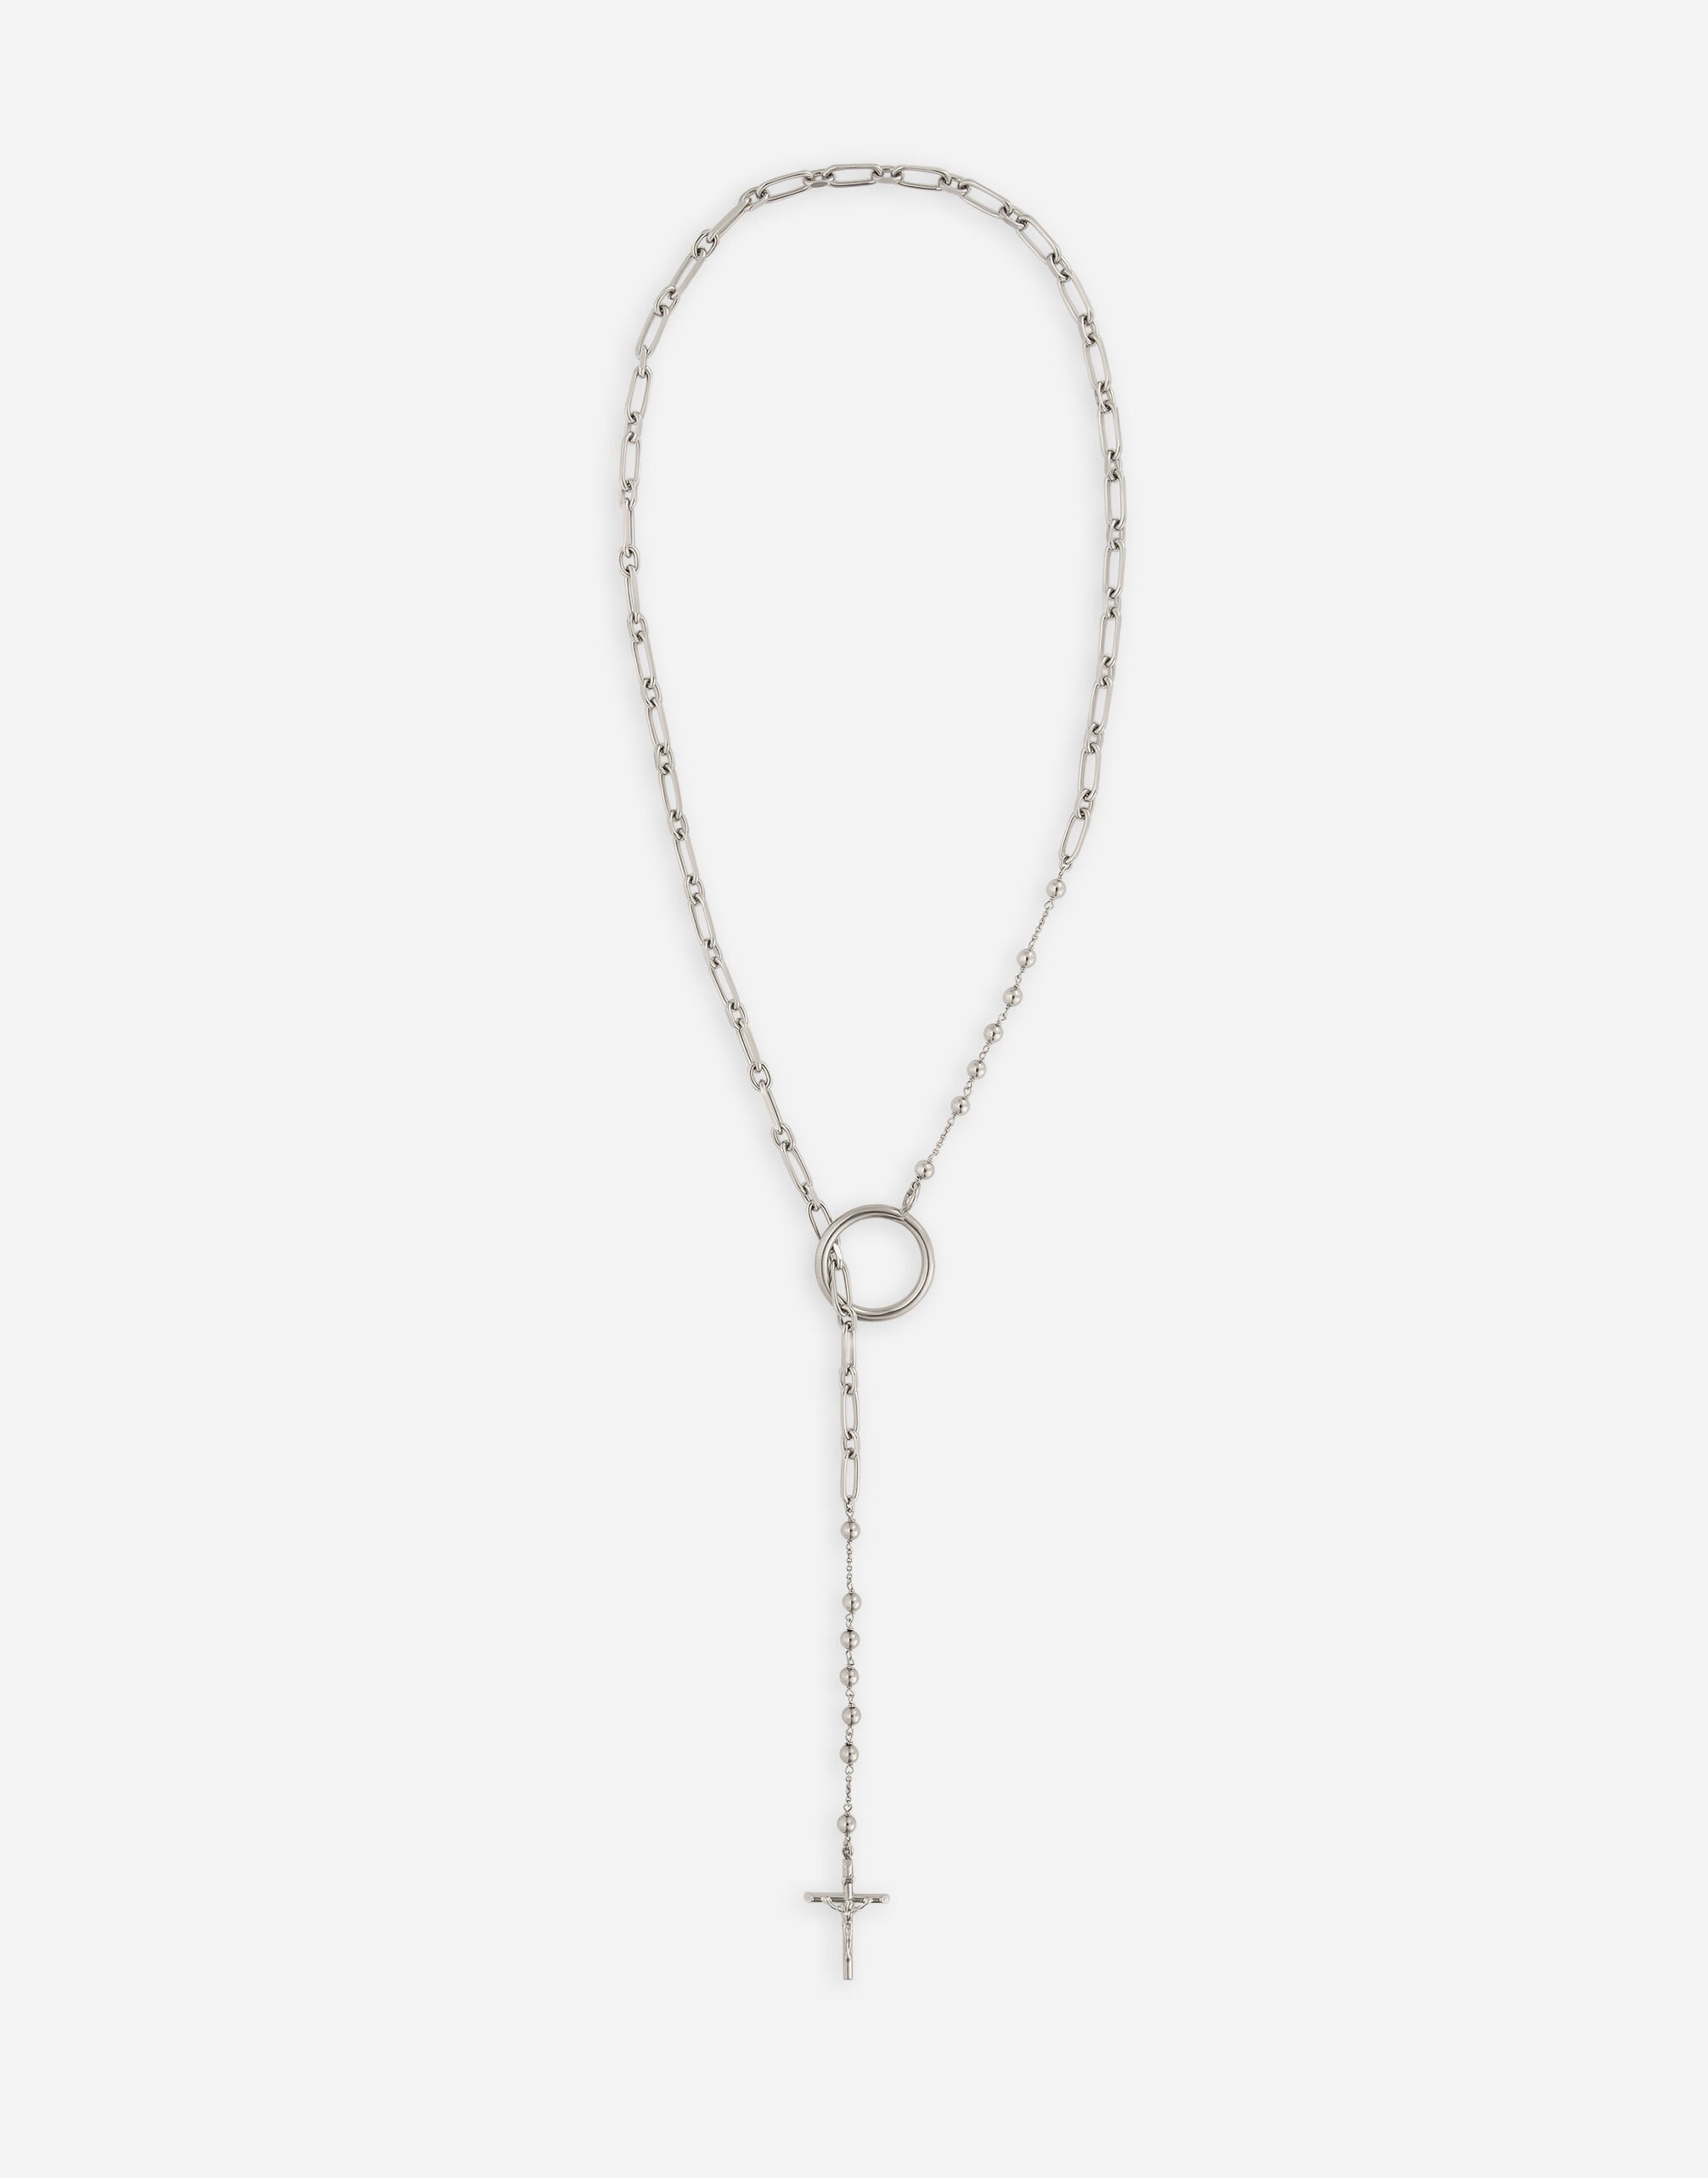 Dolce & Gabbana Rosary necklace with chain detailing Black BB6002AI413